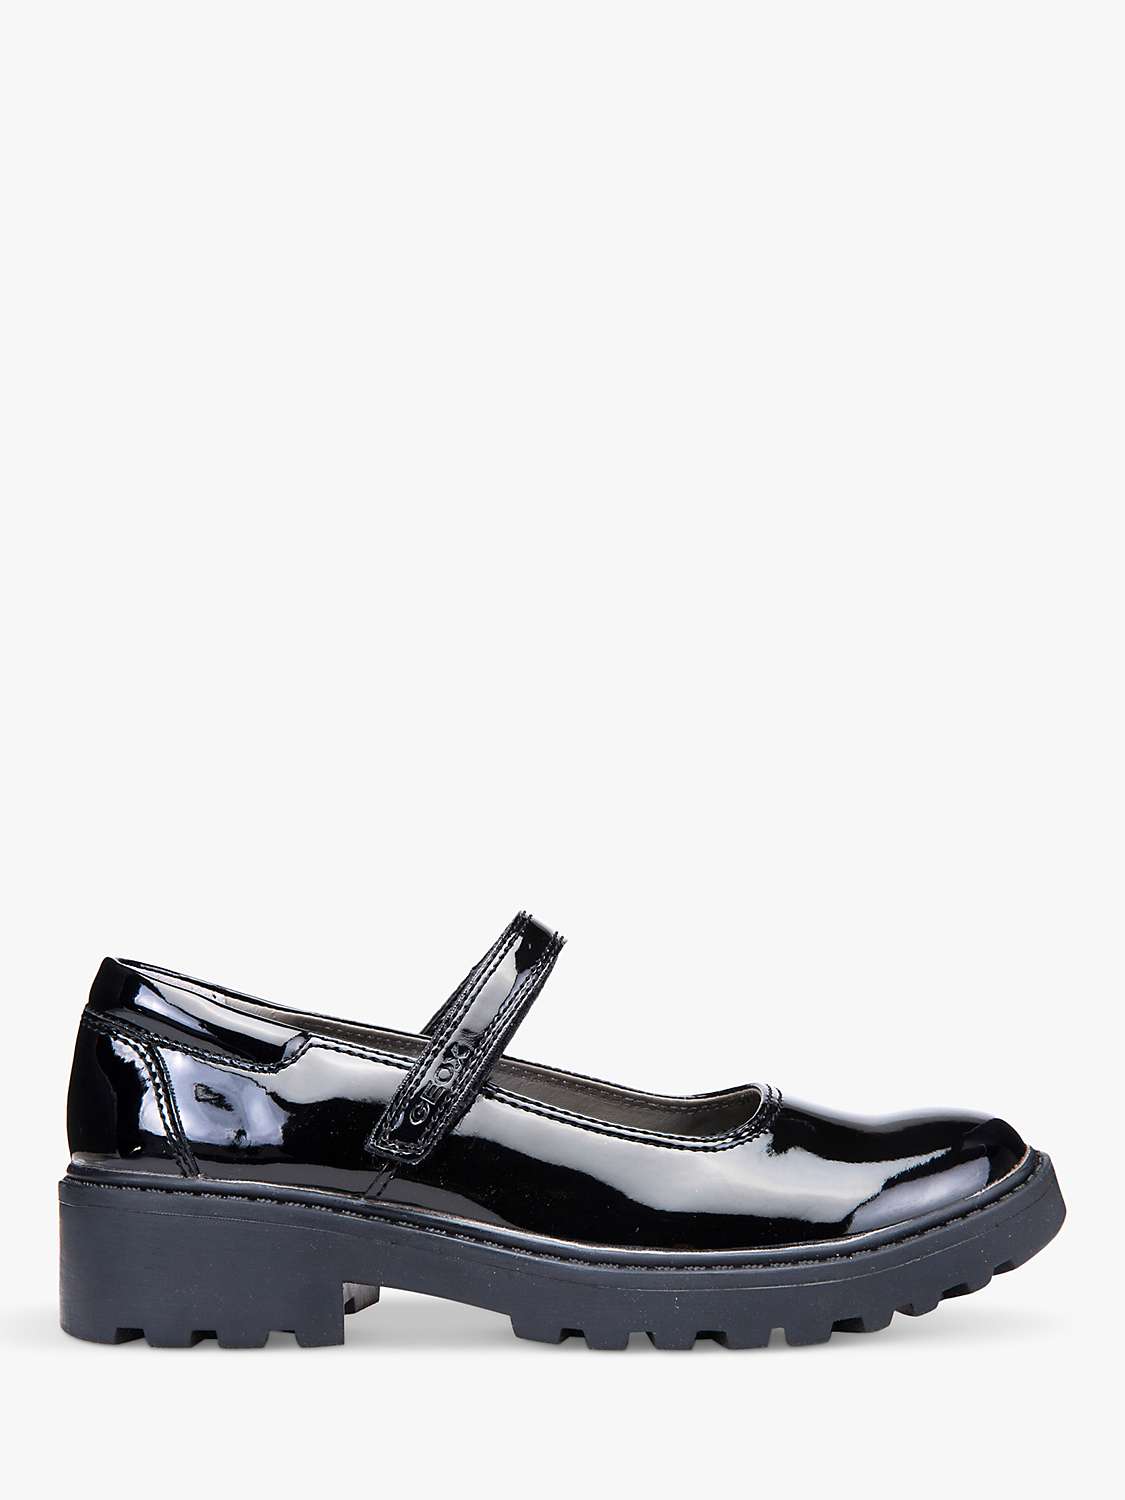 Buy Geox Kids' Casey Faux Leather Mary Jane Patent School Shoes, Black Online at johnlewis.com